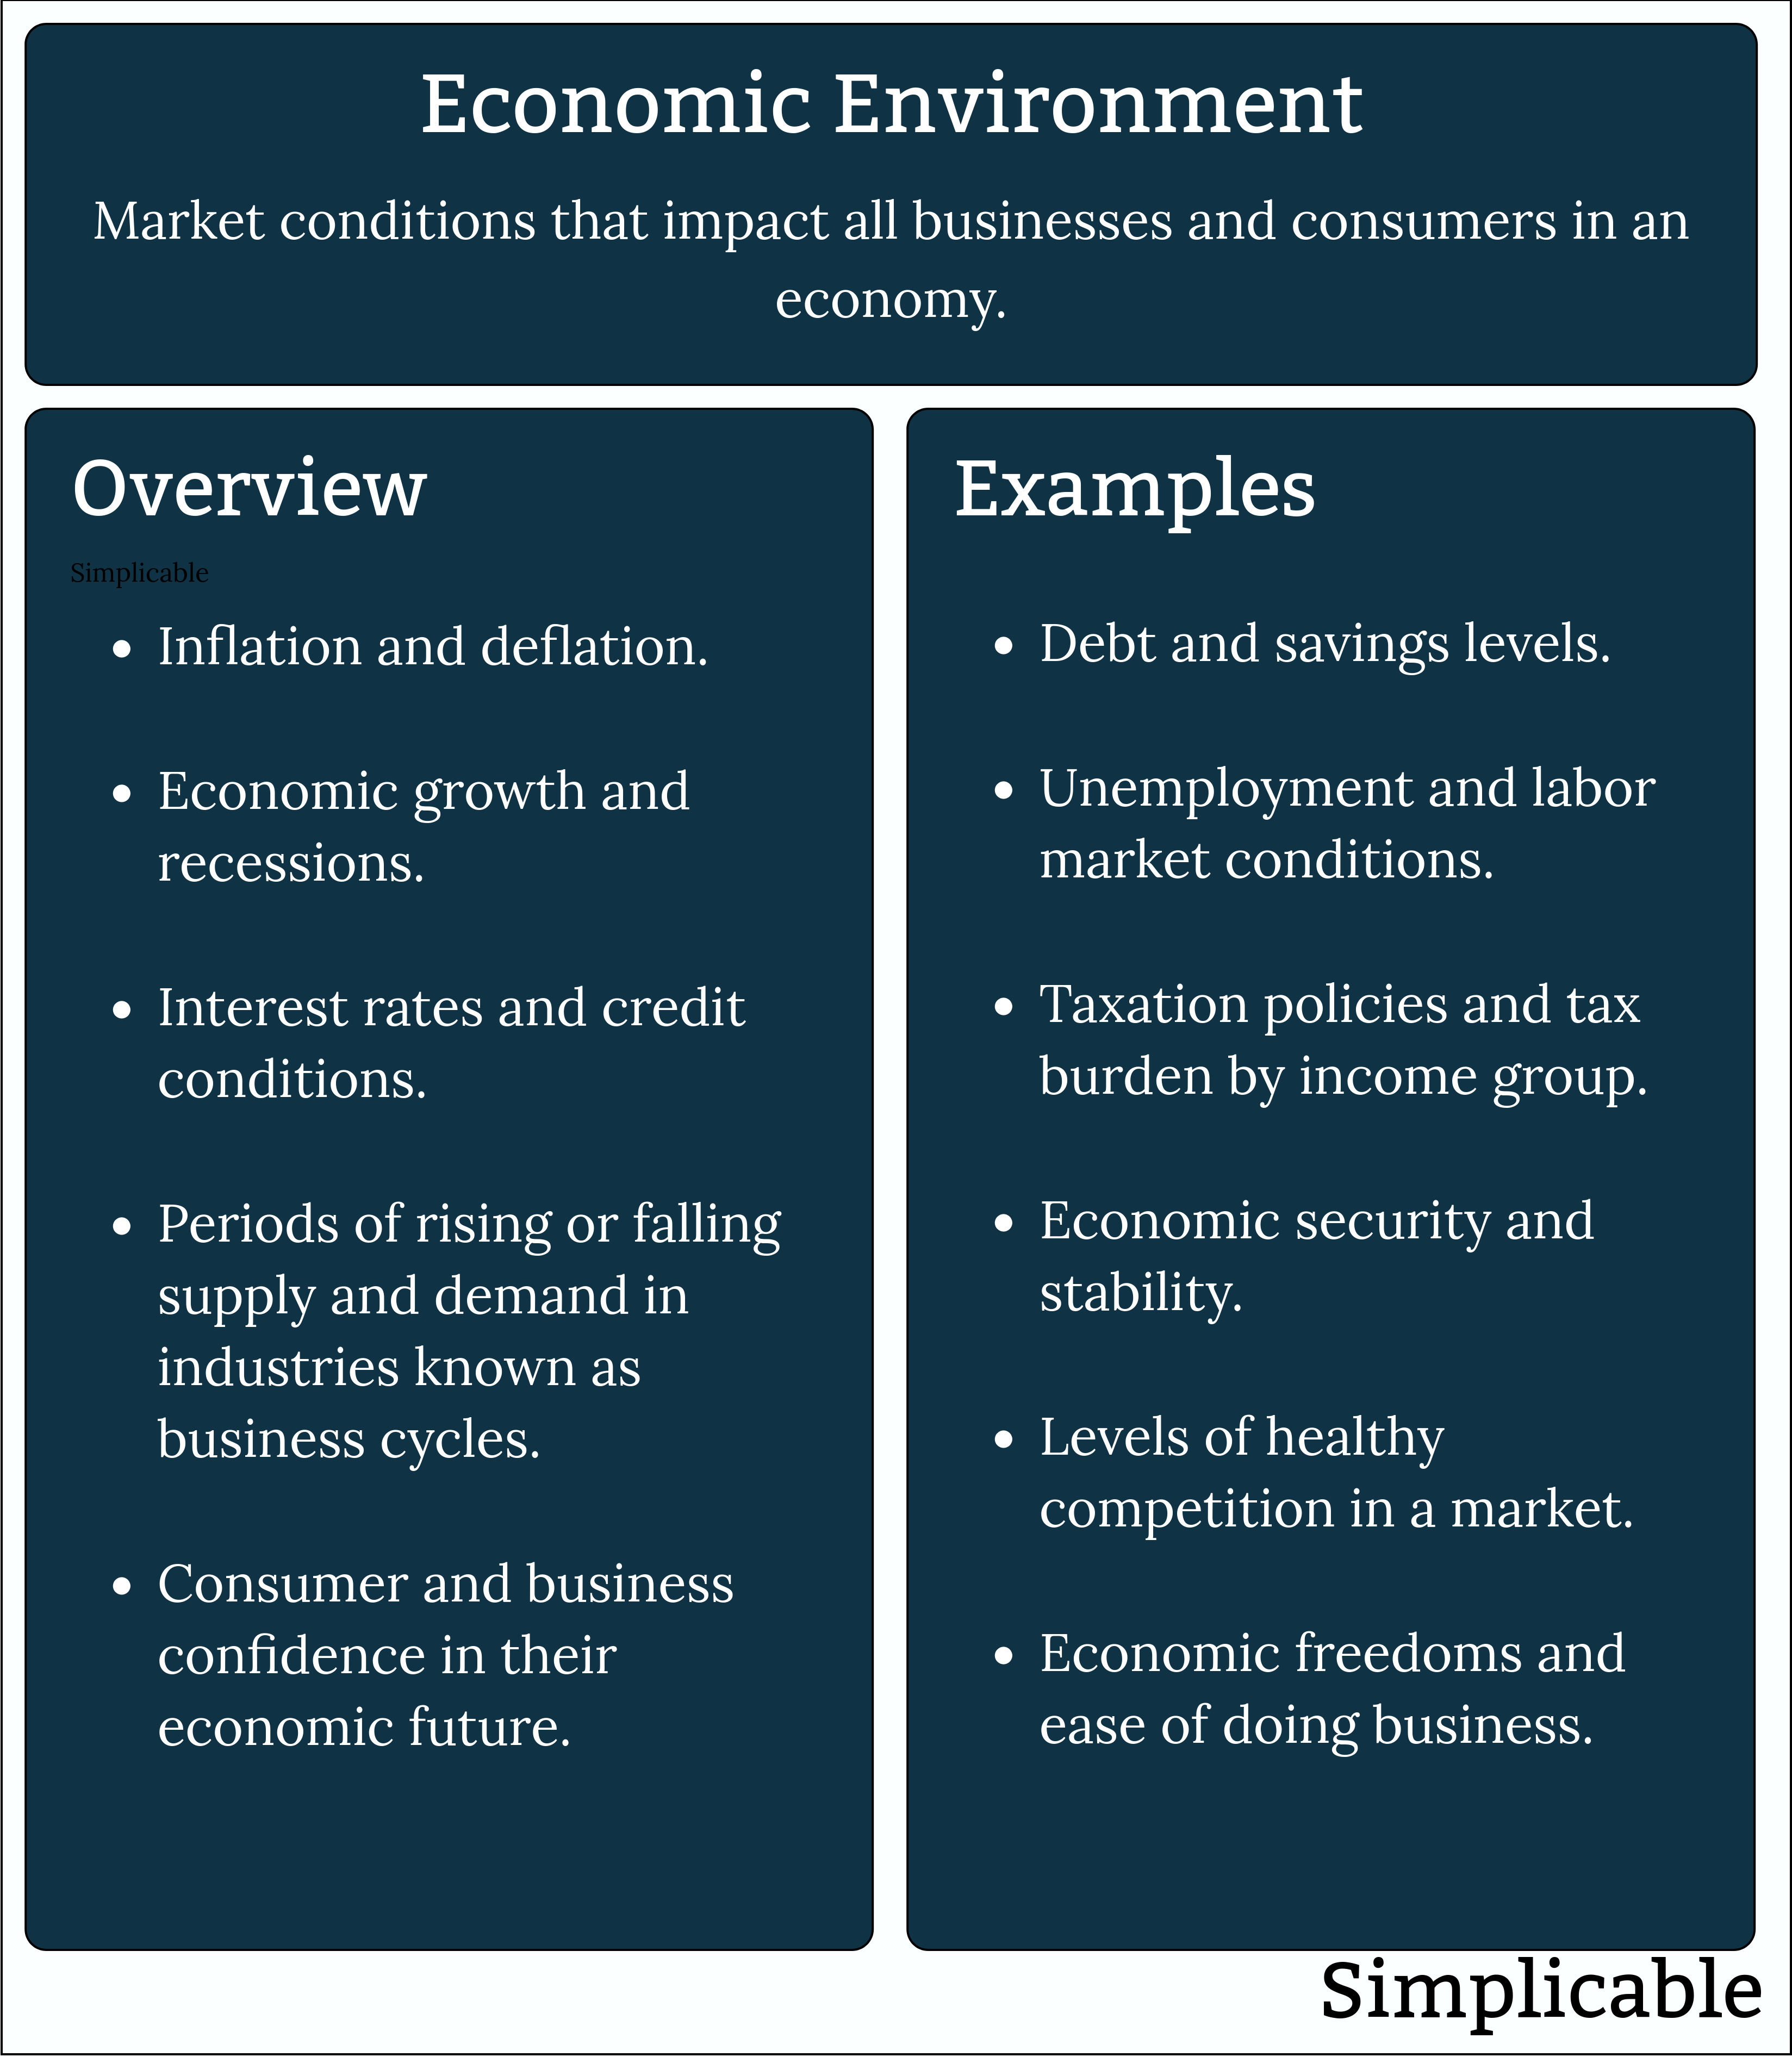 economic environment overview and examples